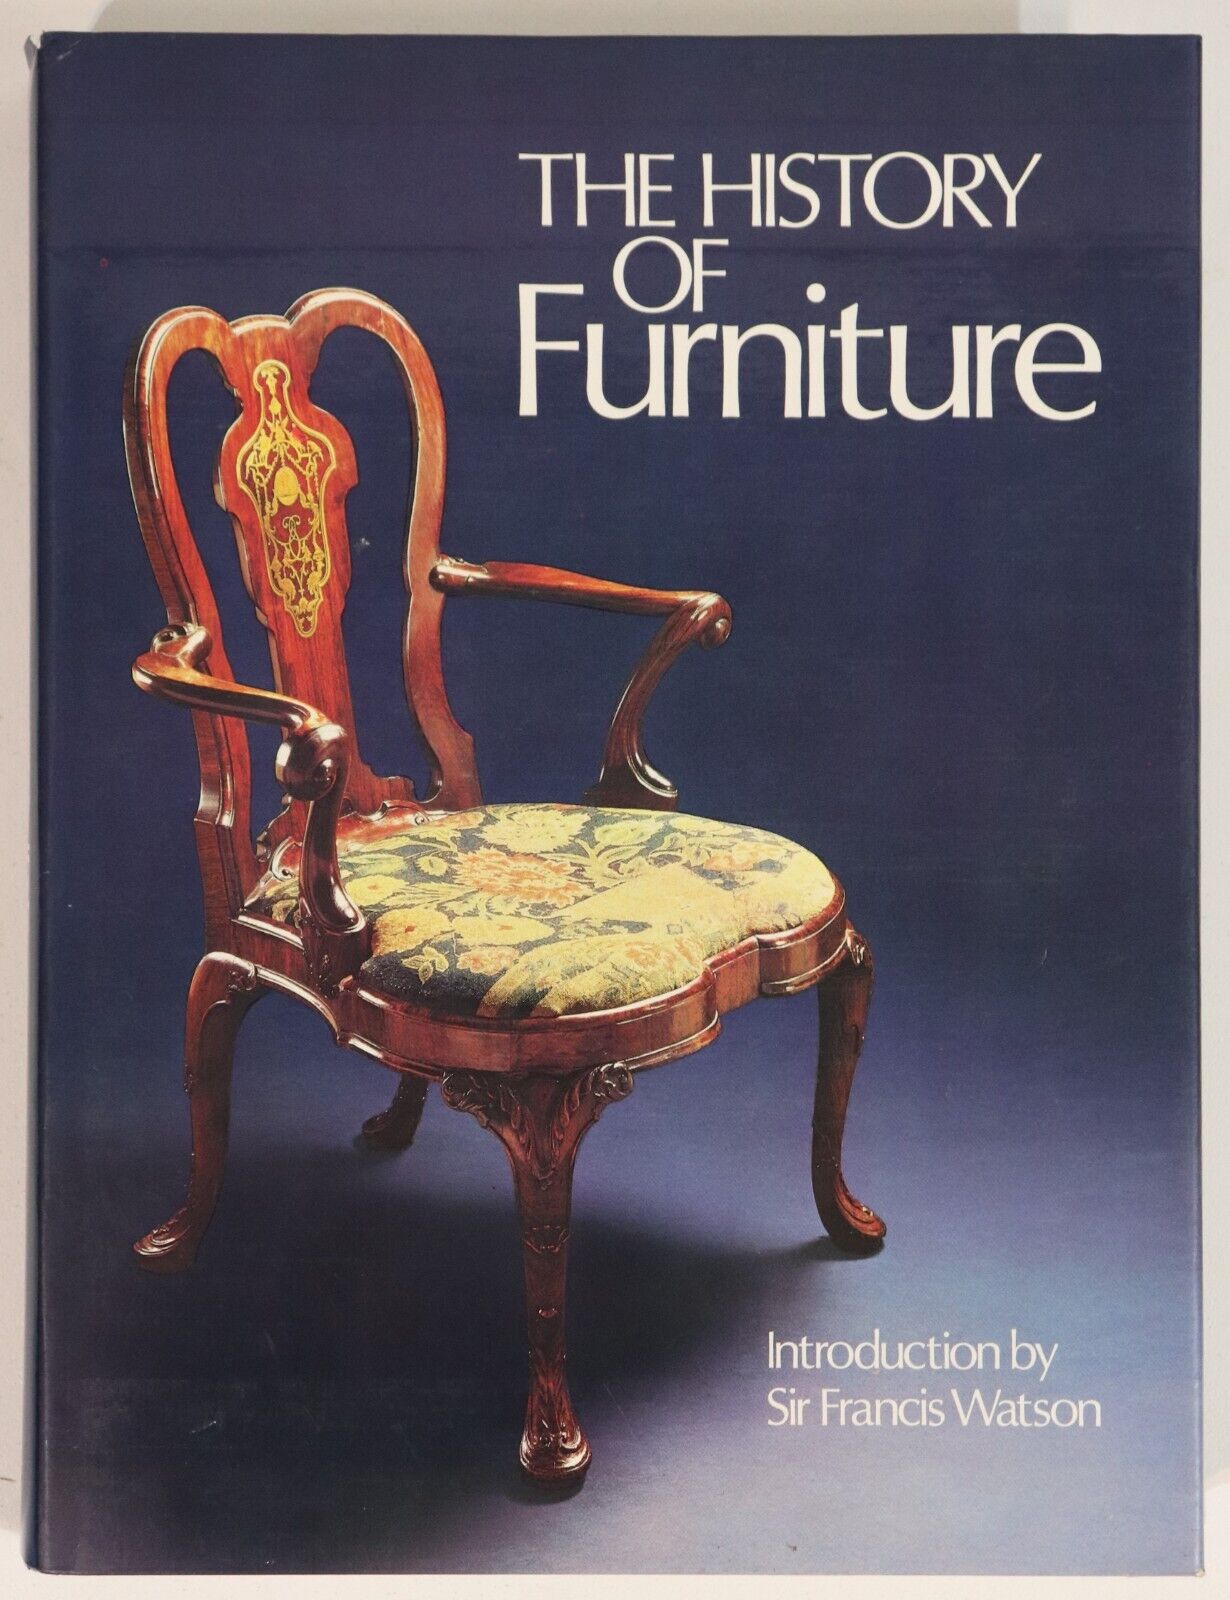 The History Of Furniture - 1982 - Antique Furniture Reference Book